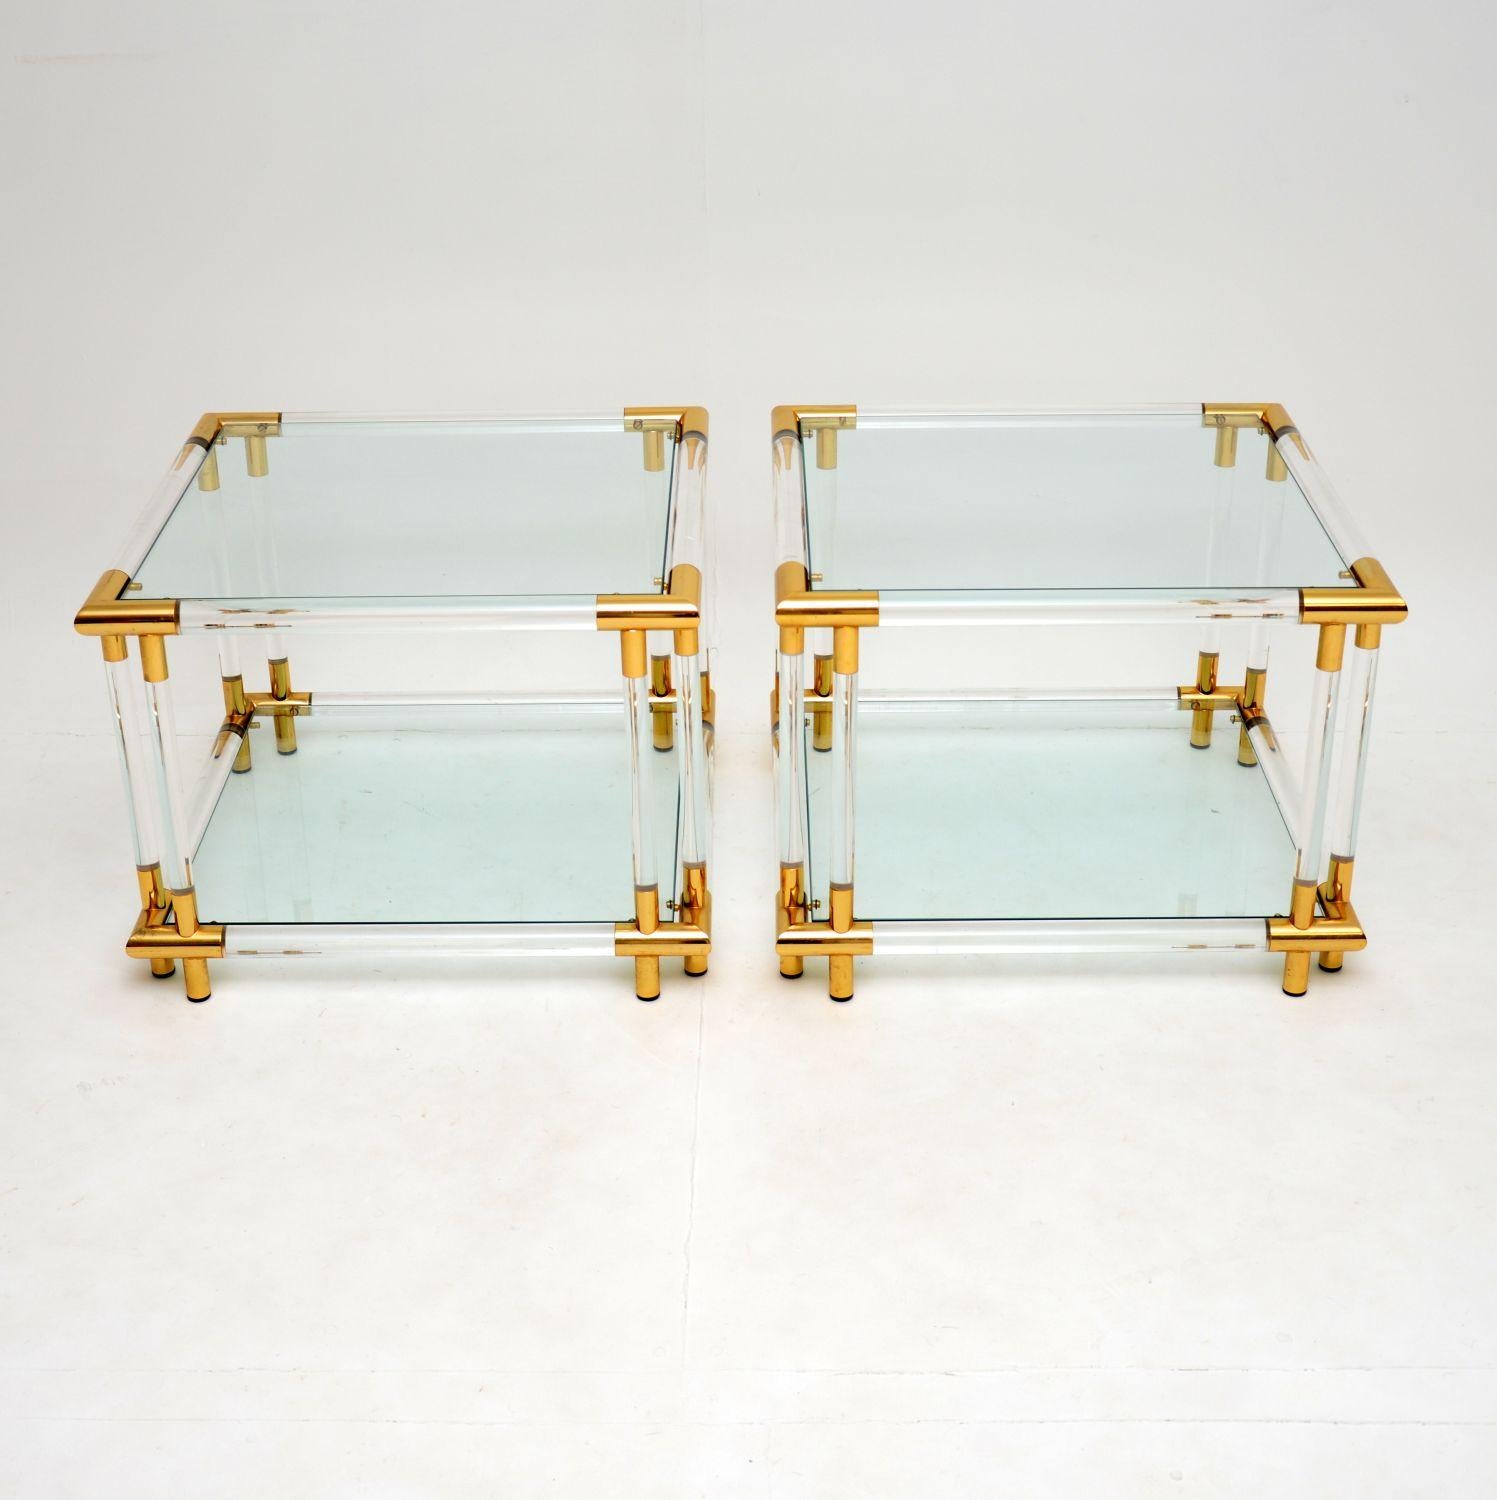 A superb pair of vintage glass top side tables, with clear acrylic frames accented with brass-plated aluminium. These were most likely made in France, they date from the 1970s.

The quality is fantastic, and these are in excellent condition